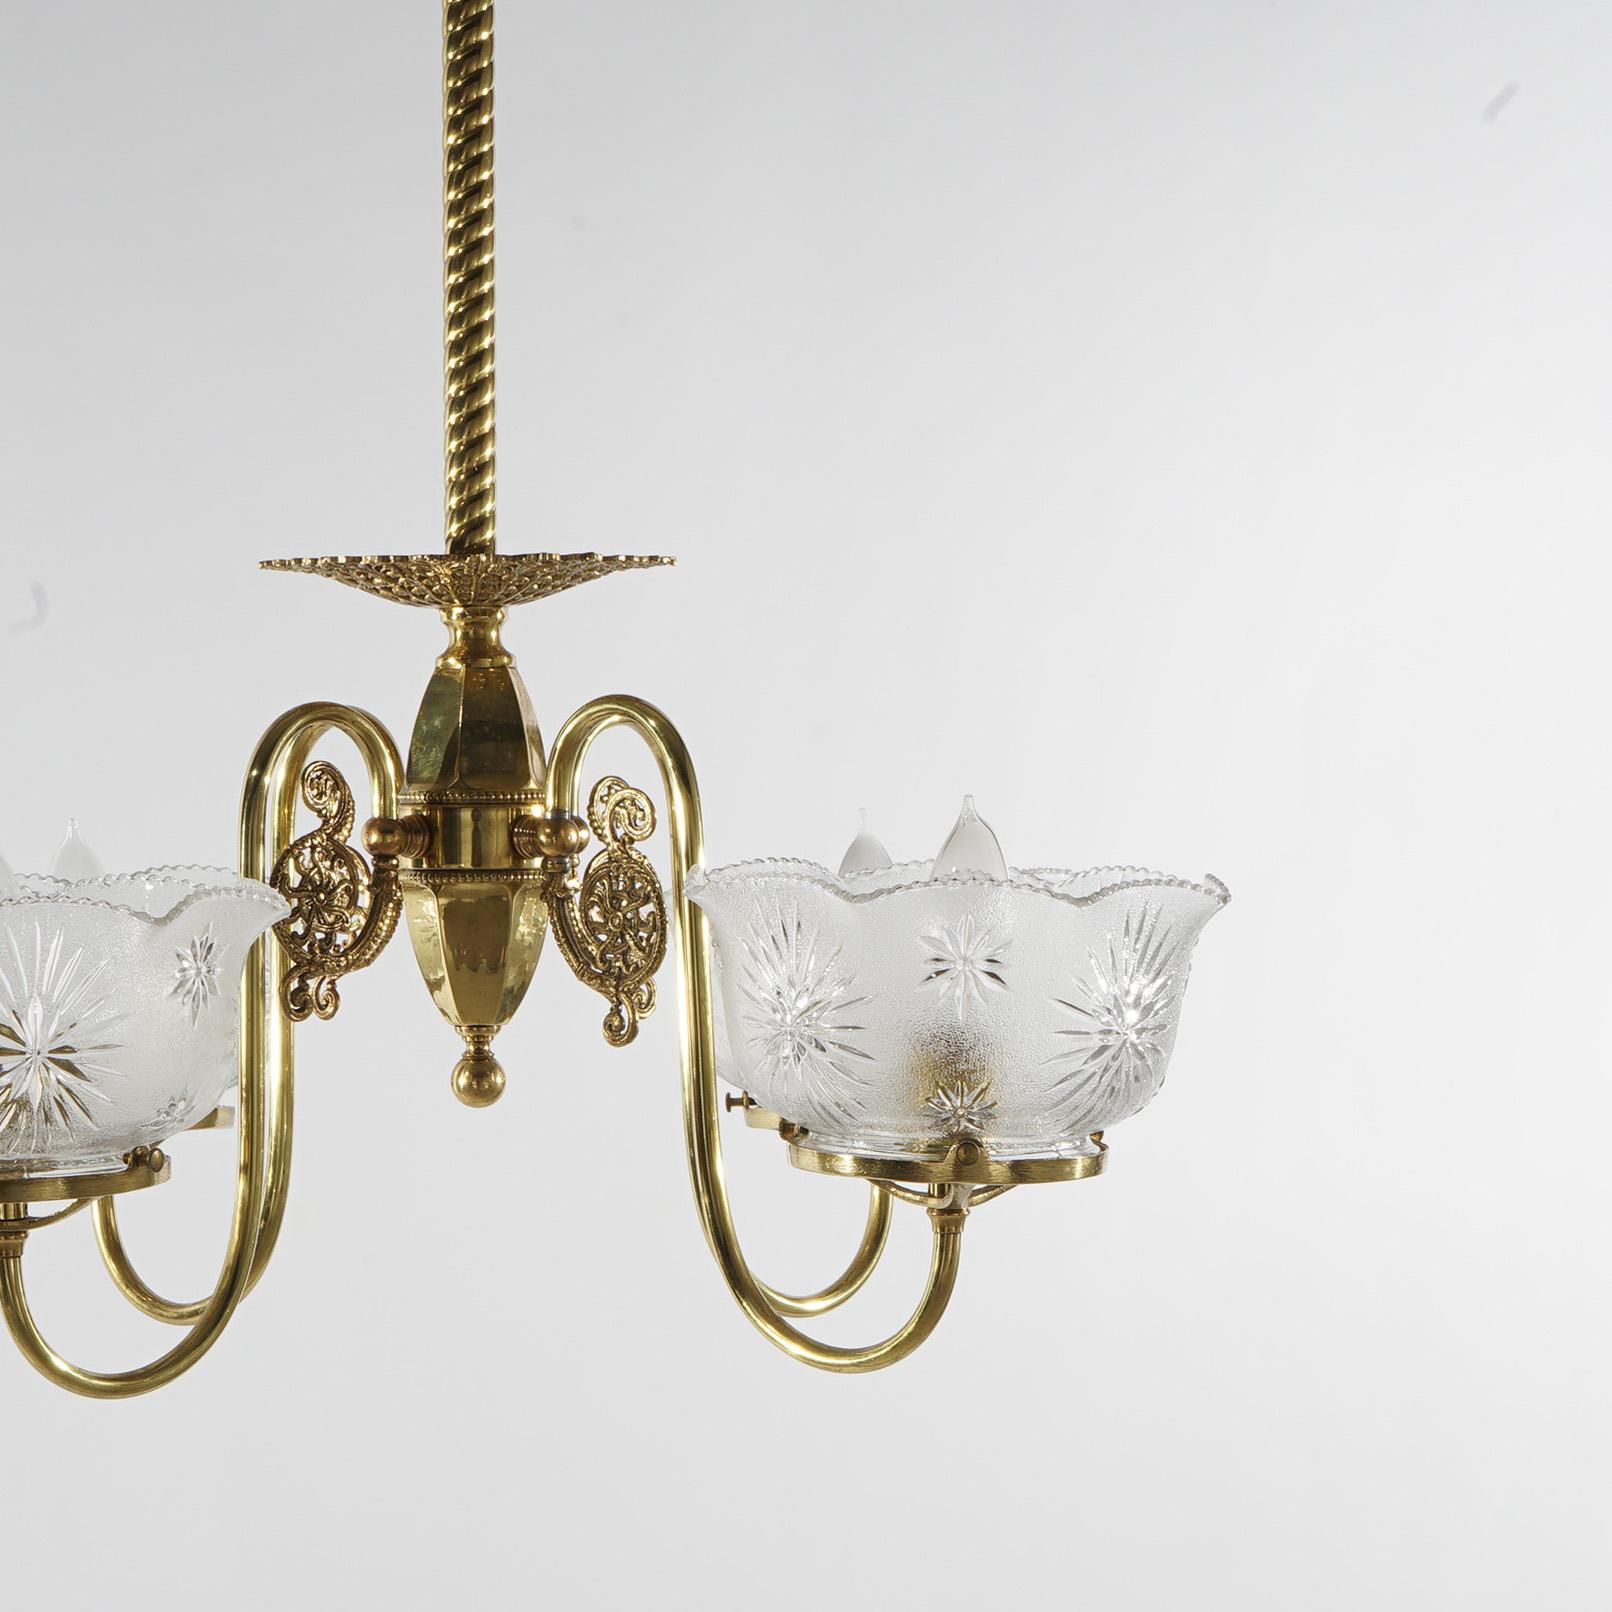 19th Century Antique Brass Four-Arm Gas Light Hanging Fixture with Glass Shades C1880 For Sale